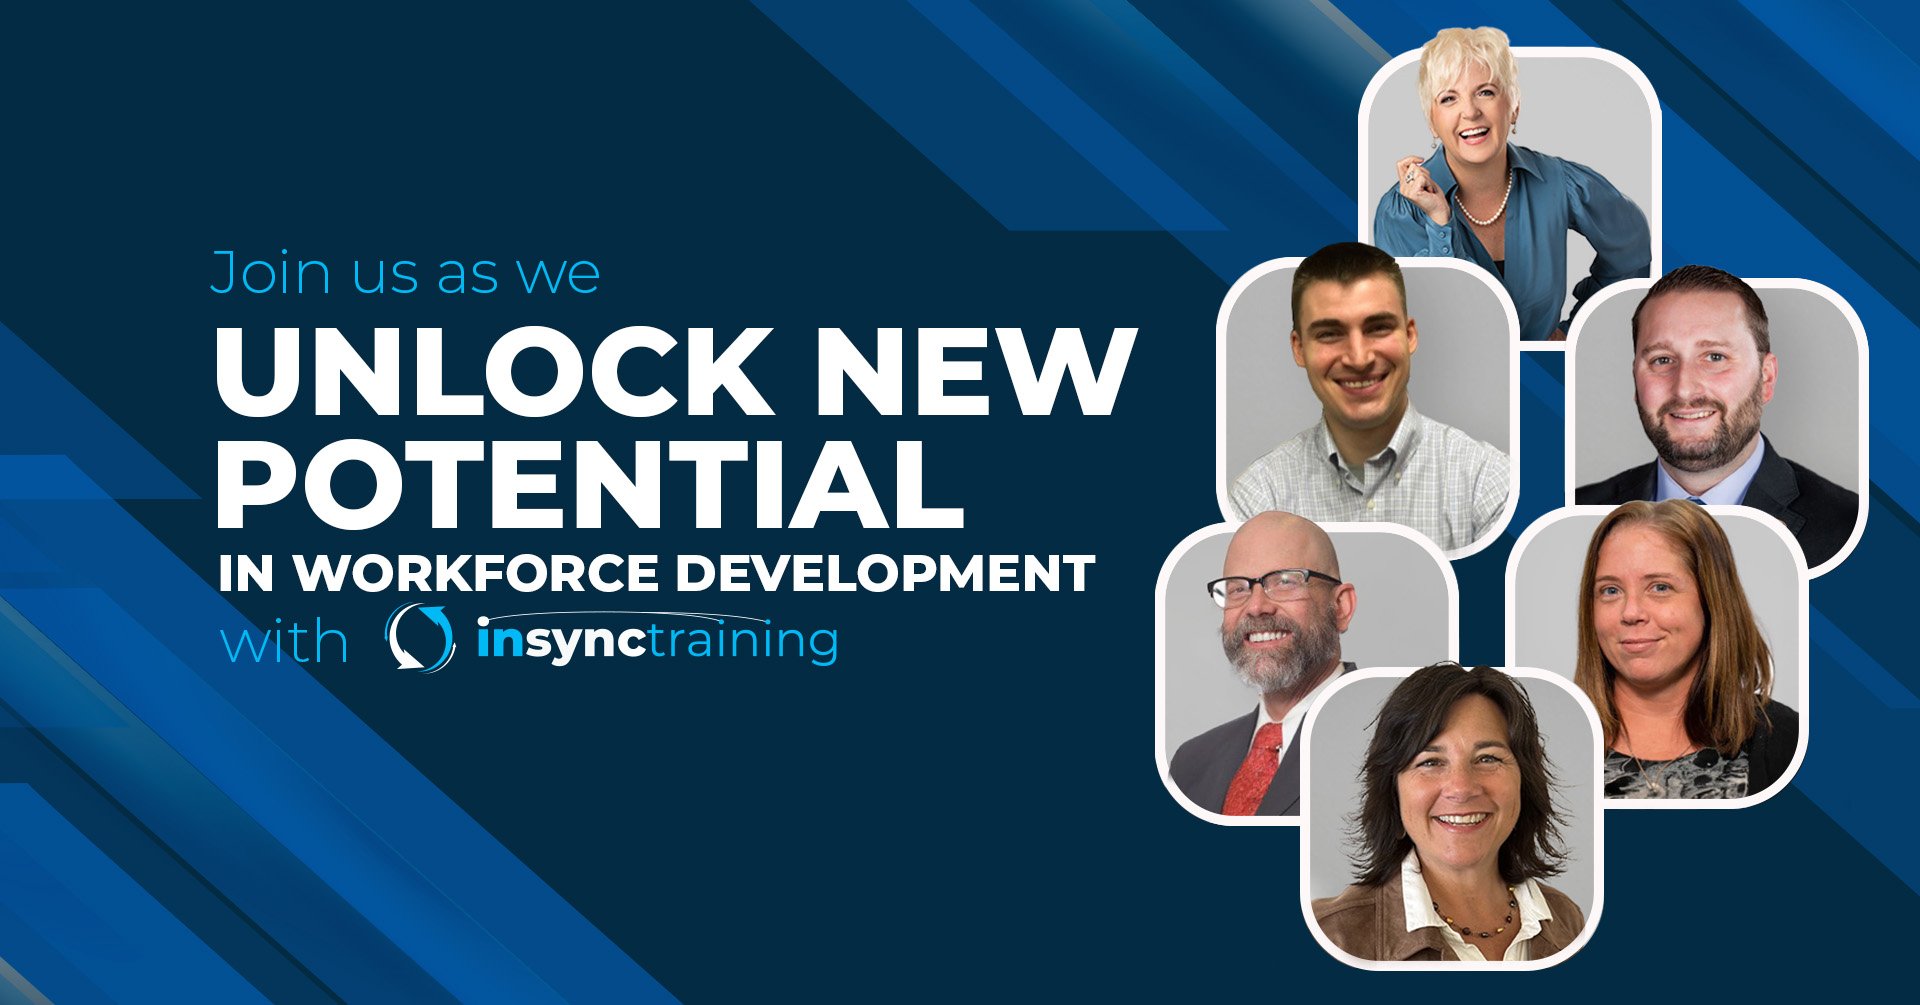 For Immediate Release - InSync Training to Host Panel Discussion